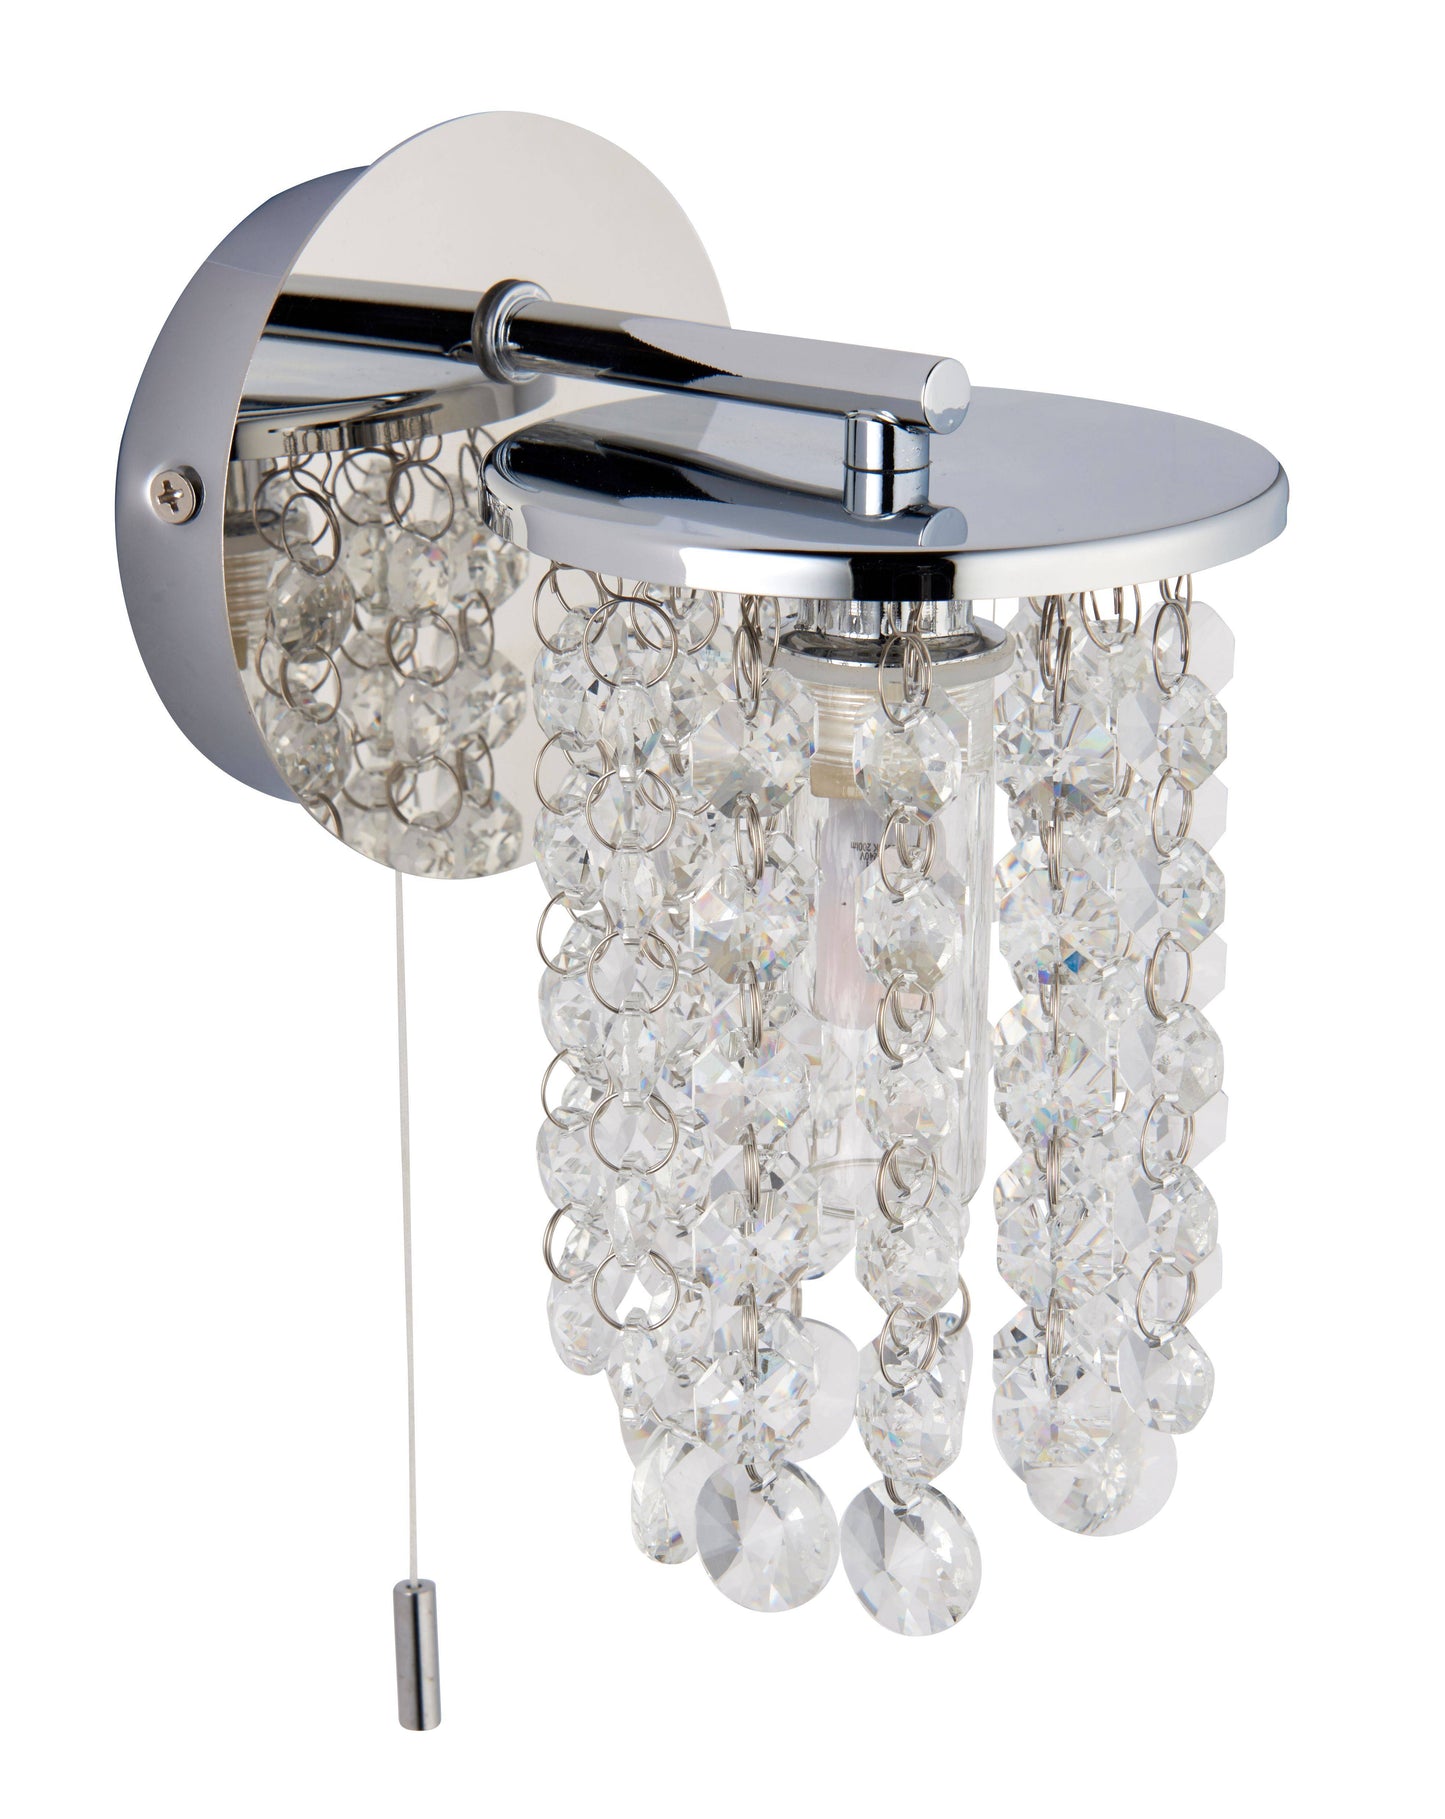 Felecia 1 Light Indoor Polished Chrome Wall Light with Crystal Detailing